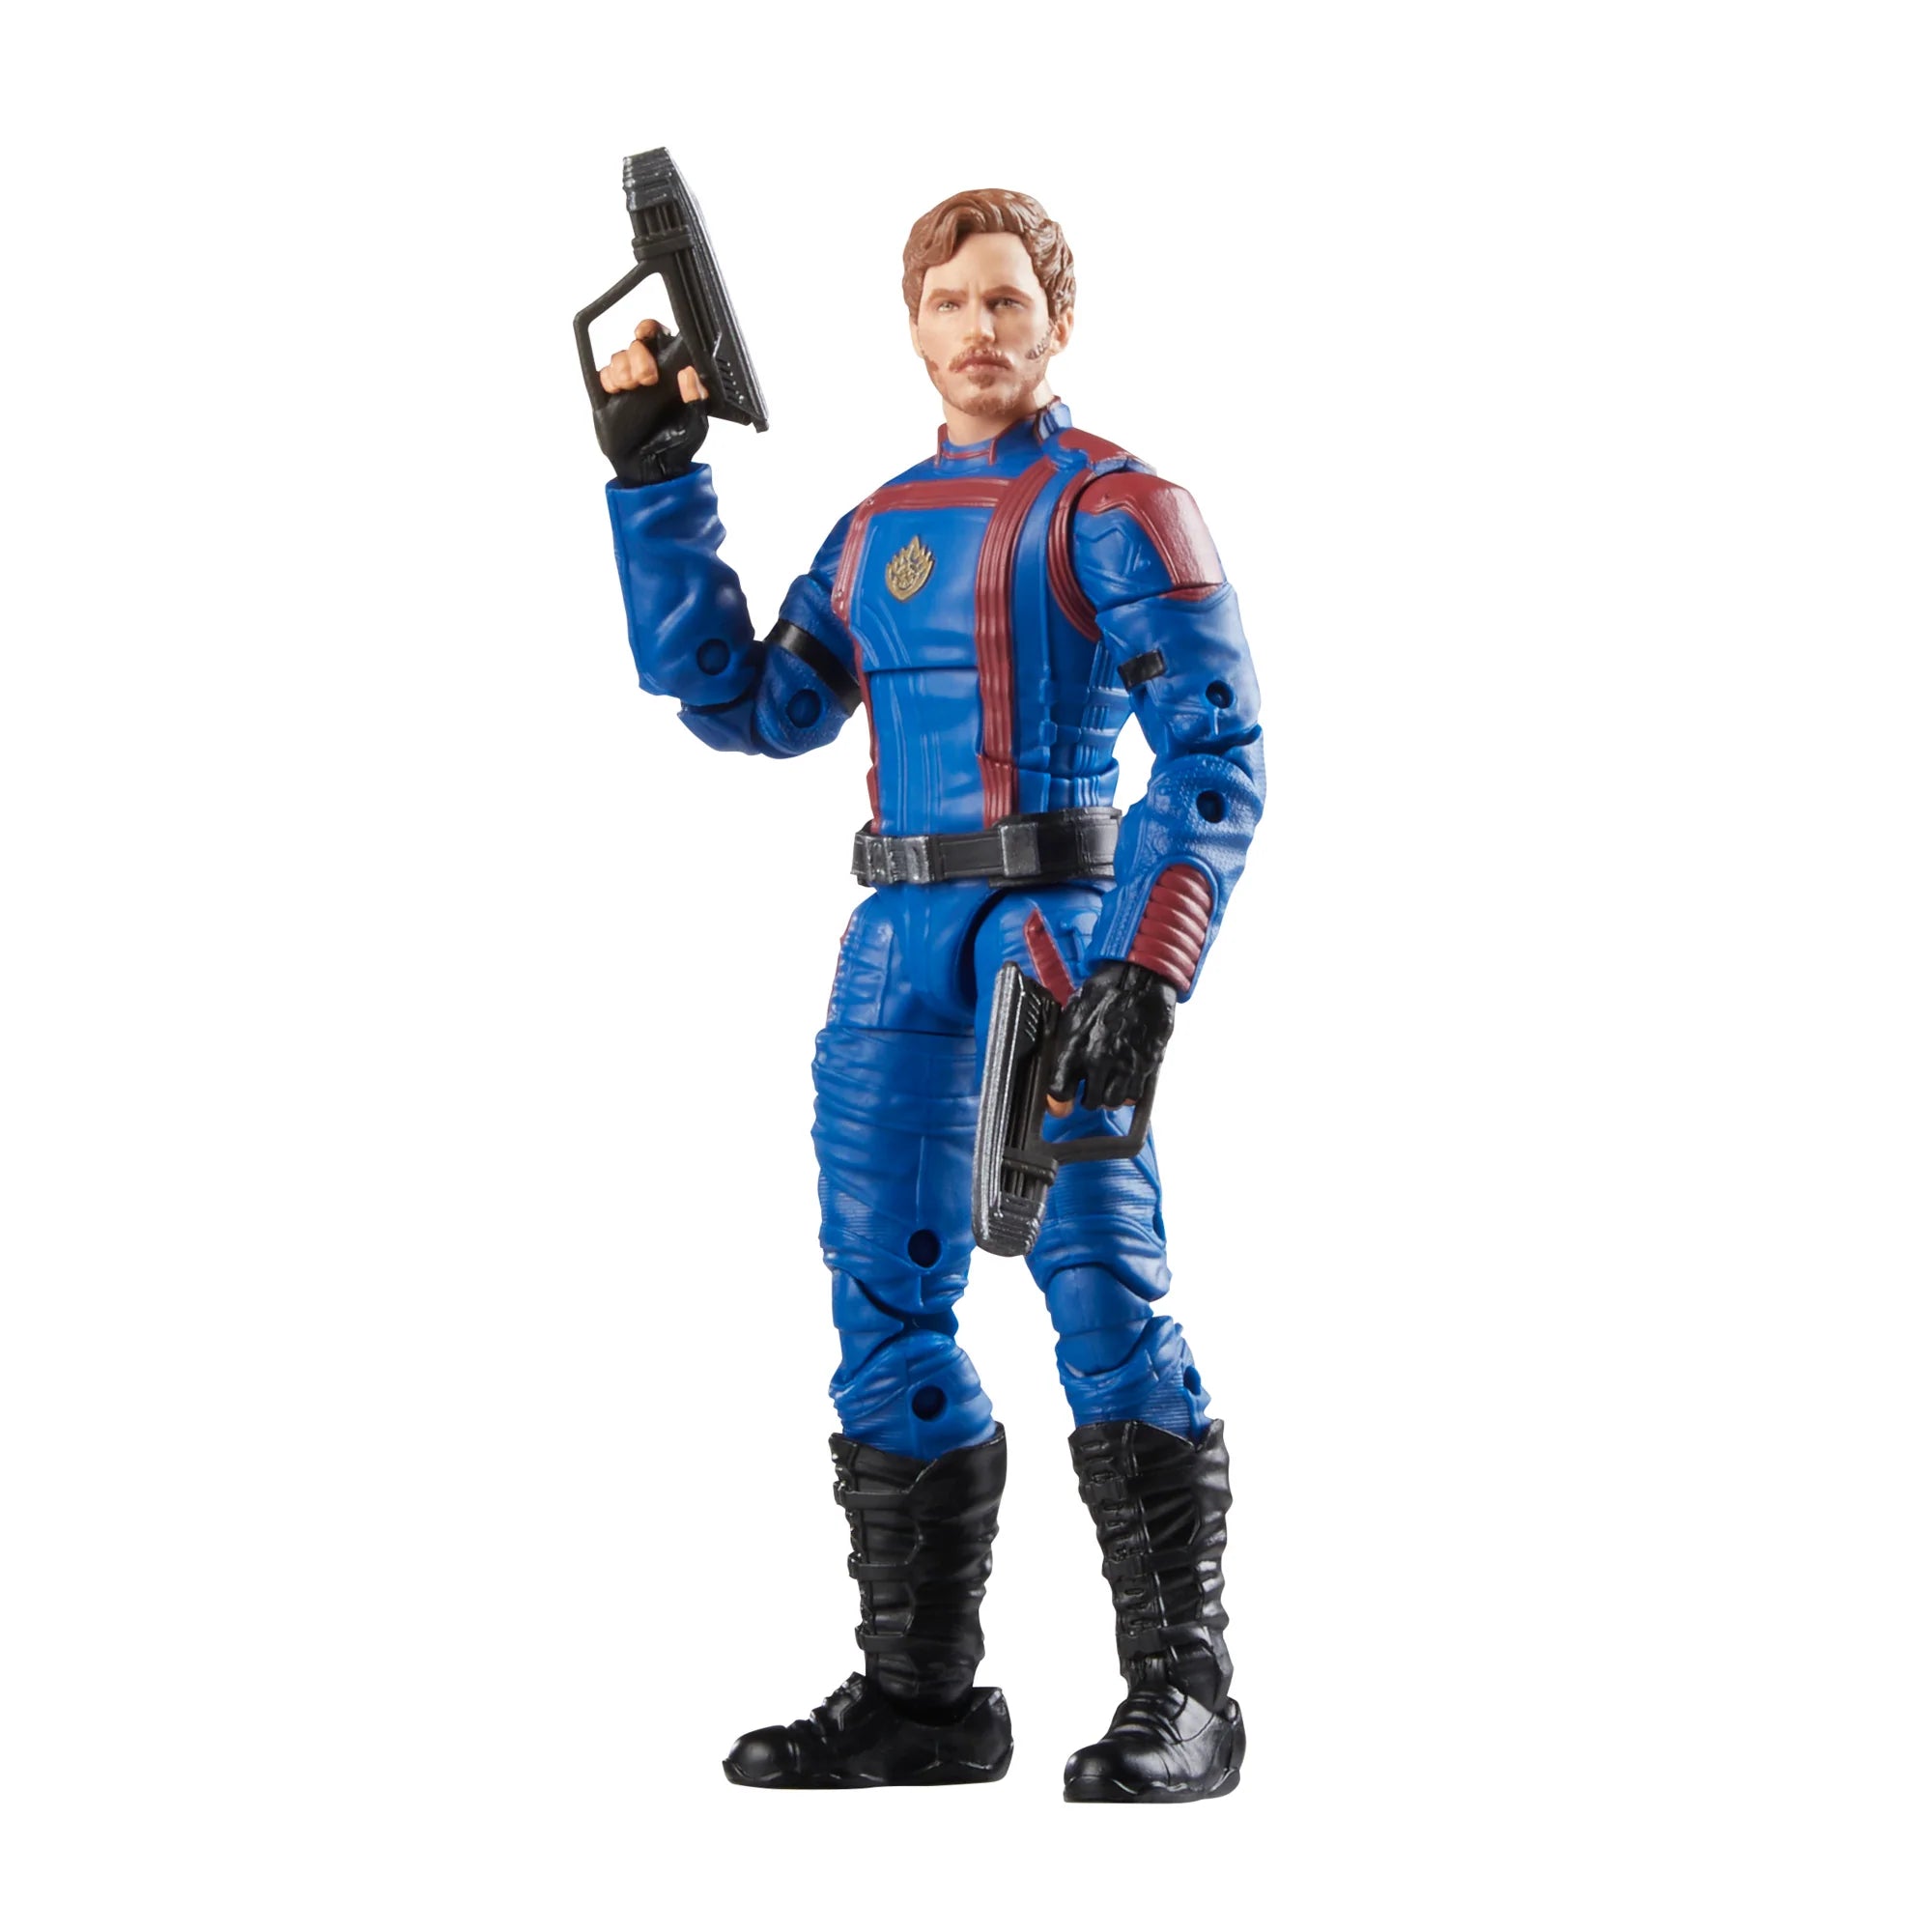 Marvel Legends Series Star-Lord Guardians of the Galaxy Figure